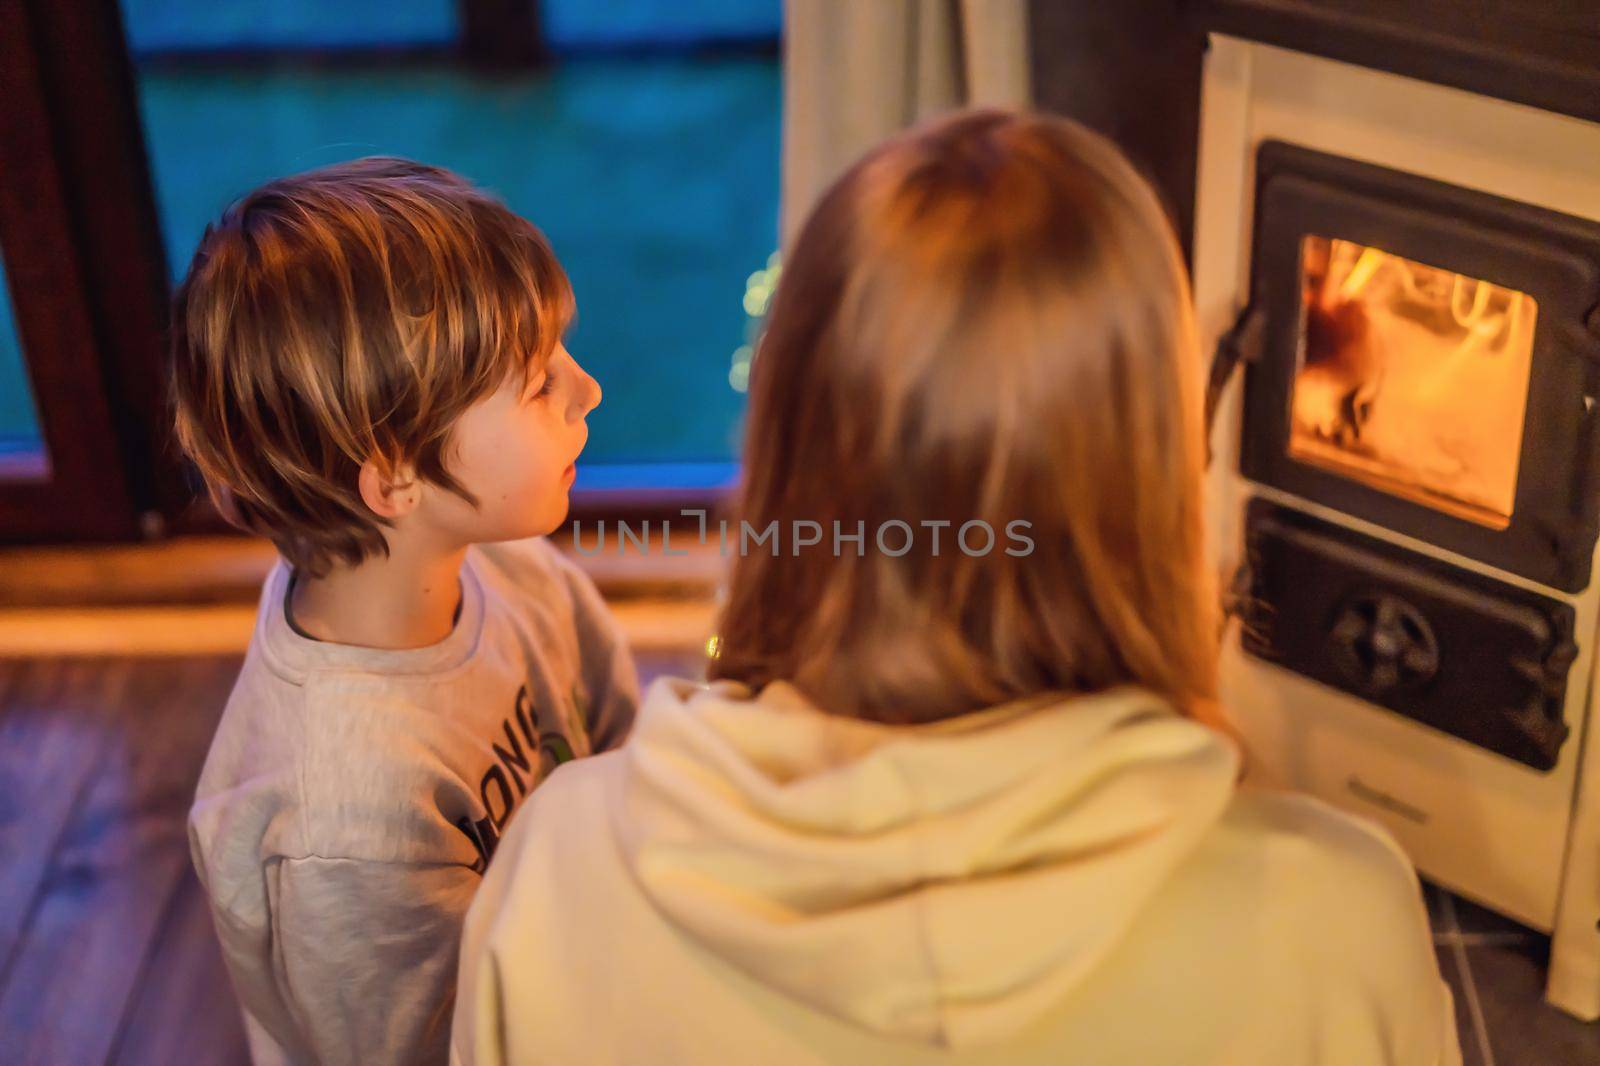 Mom and son spend time by the fireplace in Glamping. Rest in the mountains in Glamping. Cozy fireplace in a mountain house by galitskaya